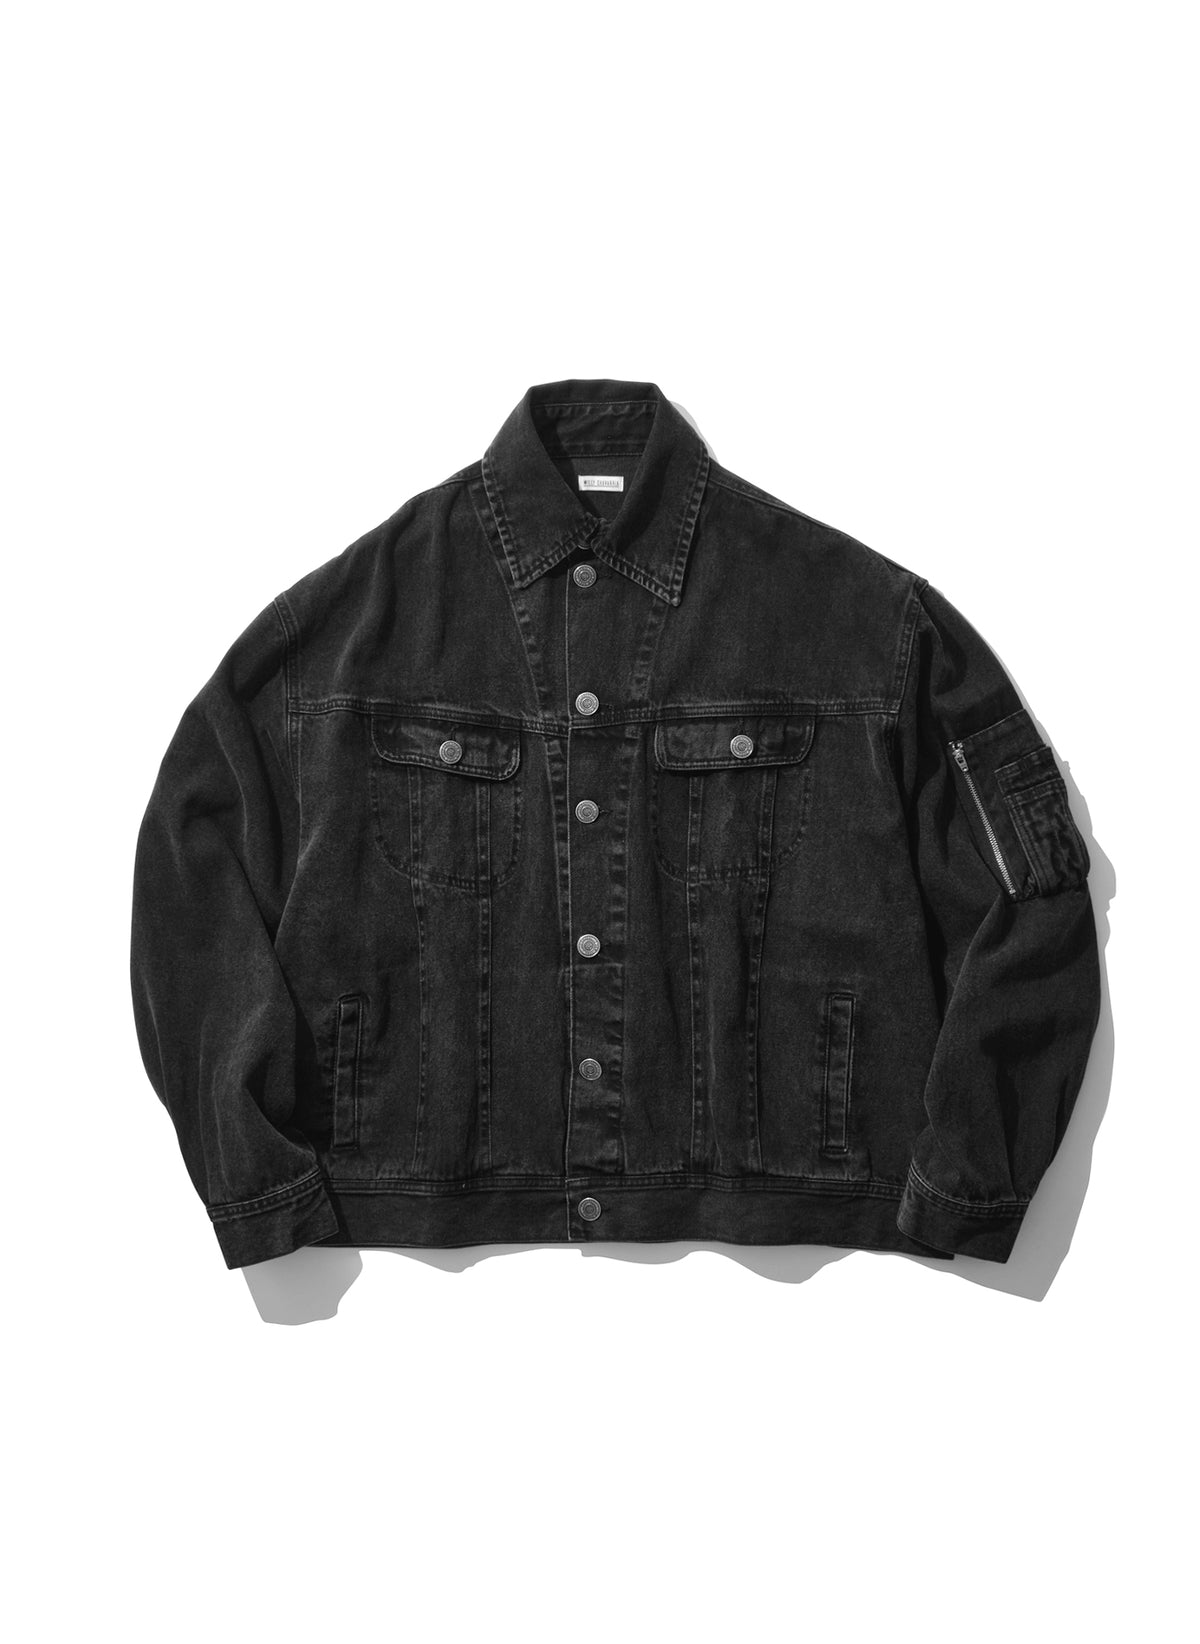 WILLY CHAVARRIA / CHACHI TRUCKER CIGARETTE POCKET JACKET WASHED BLACK